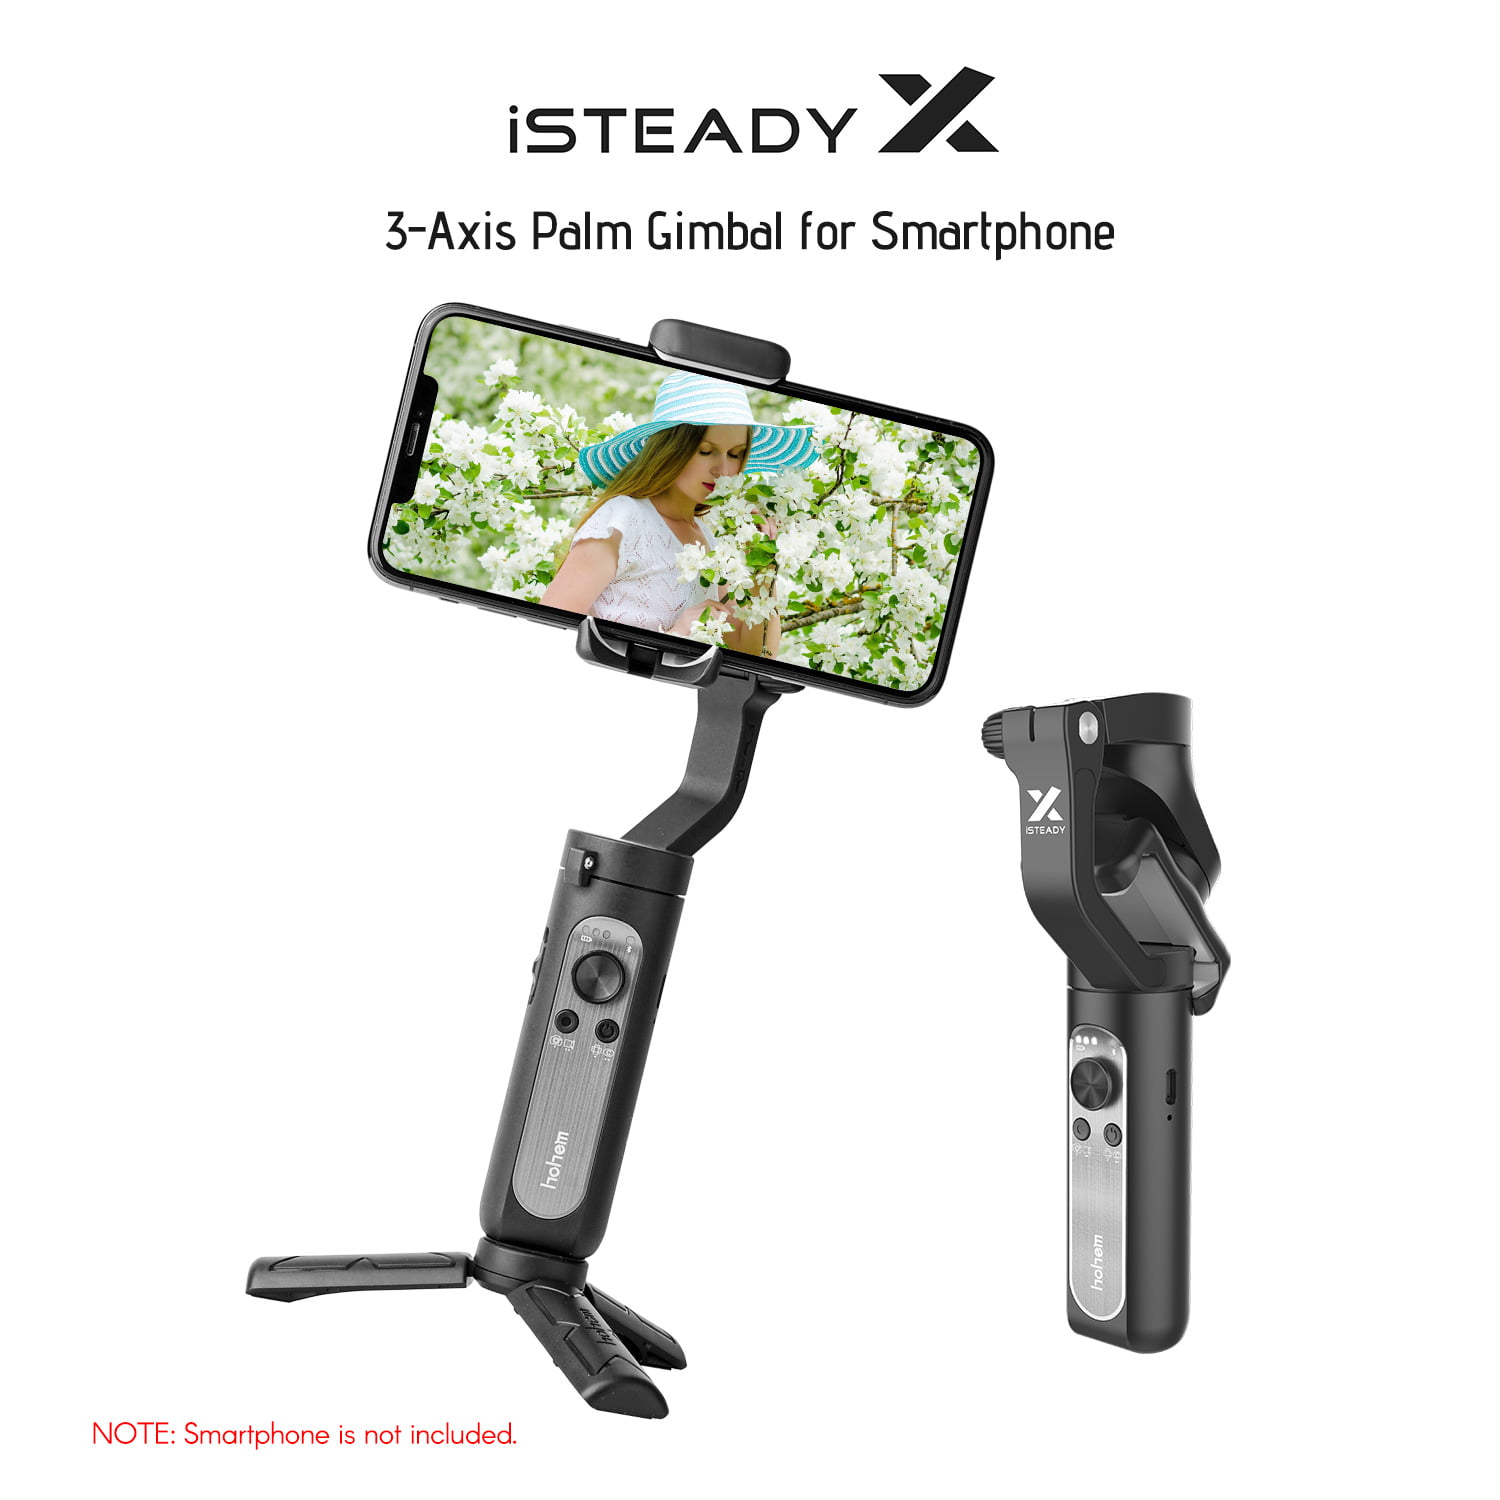 Hohem iSteady V2 3-Axis Gimbal Stabilizer for Smartphone Handheld with Grip AI Visual Tracking Type-C Reverse Charging Vlog Live YouTube for iPhone Android